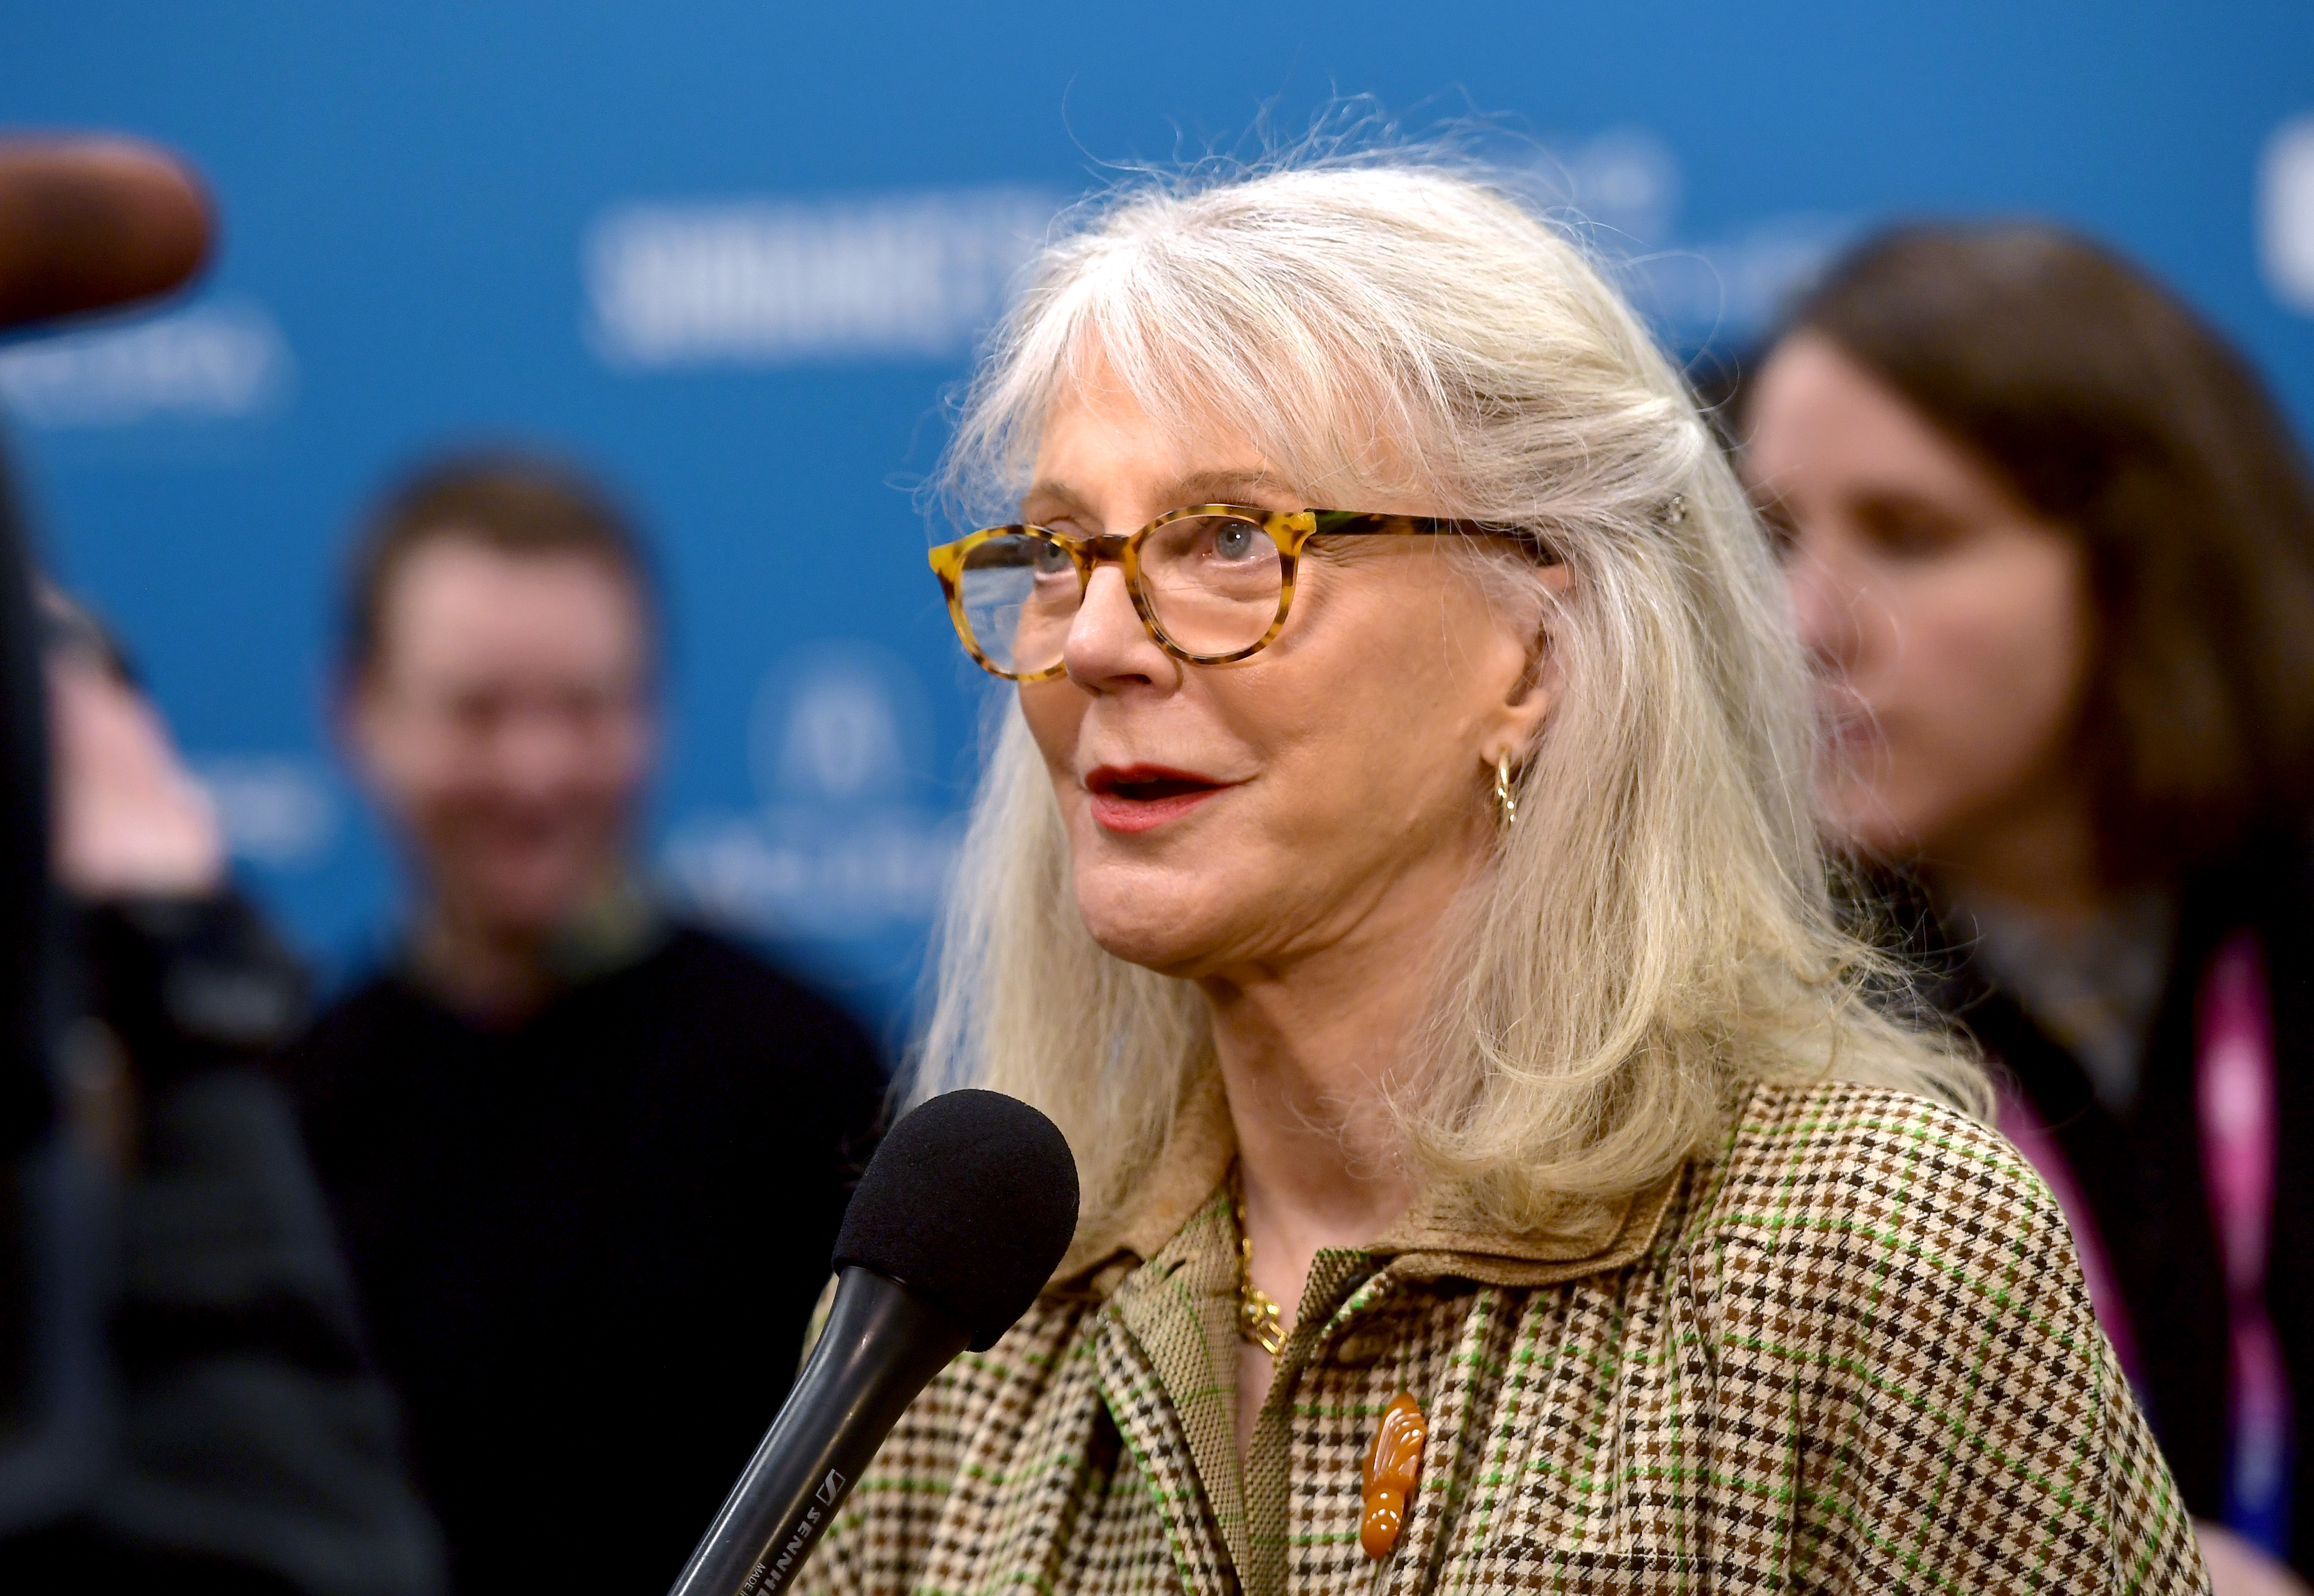 Blythe Danner on January 30, 2019, in Park City, Utah | Source: Getty Images